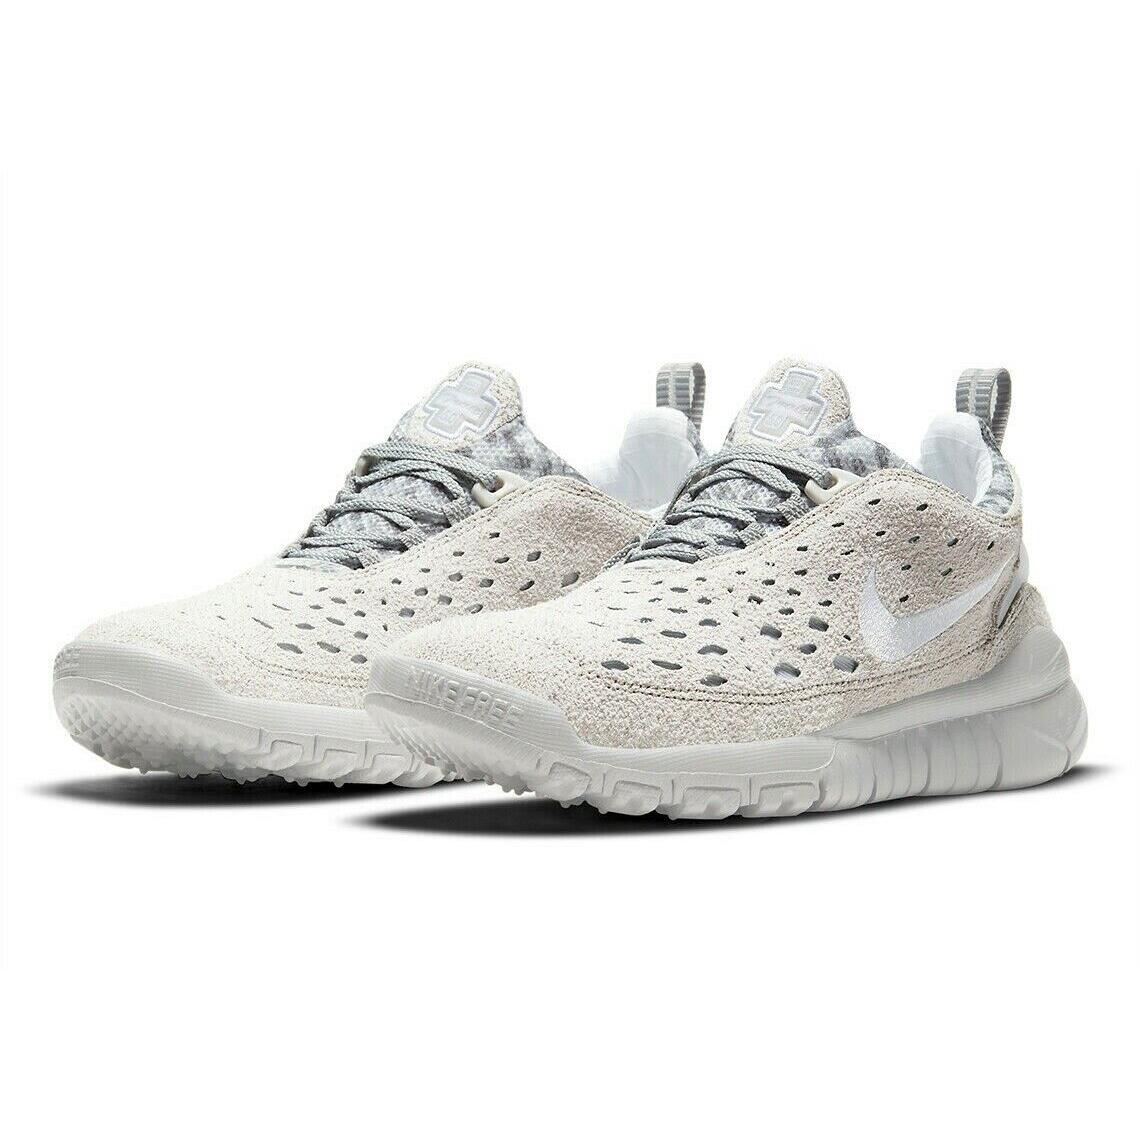 Nike Free Run Trail Womens Size 9.5 Sneakers Shoes CW5814 002 Neutral Gray - Gray